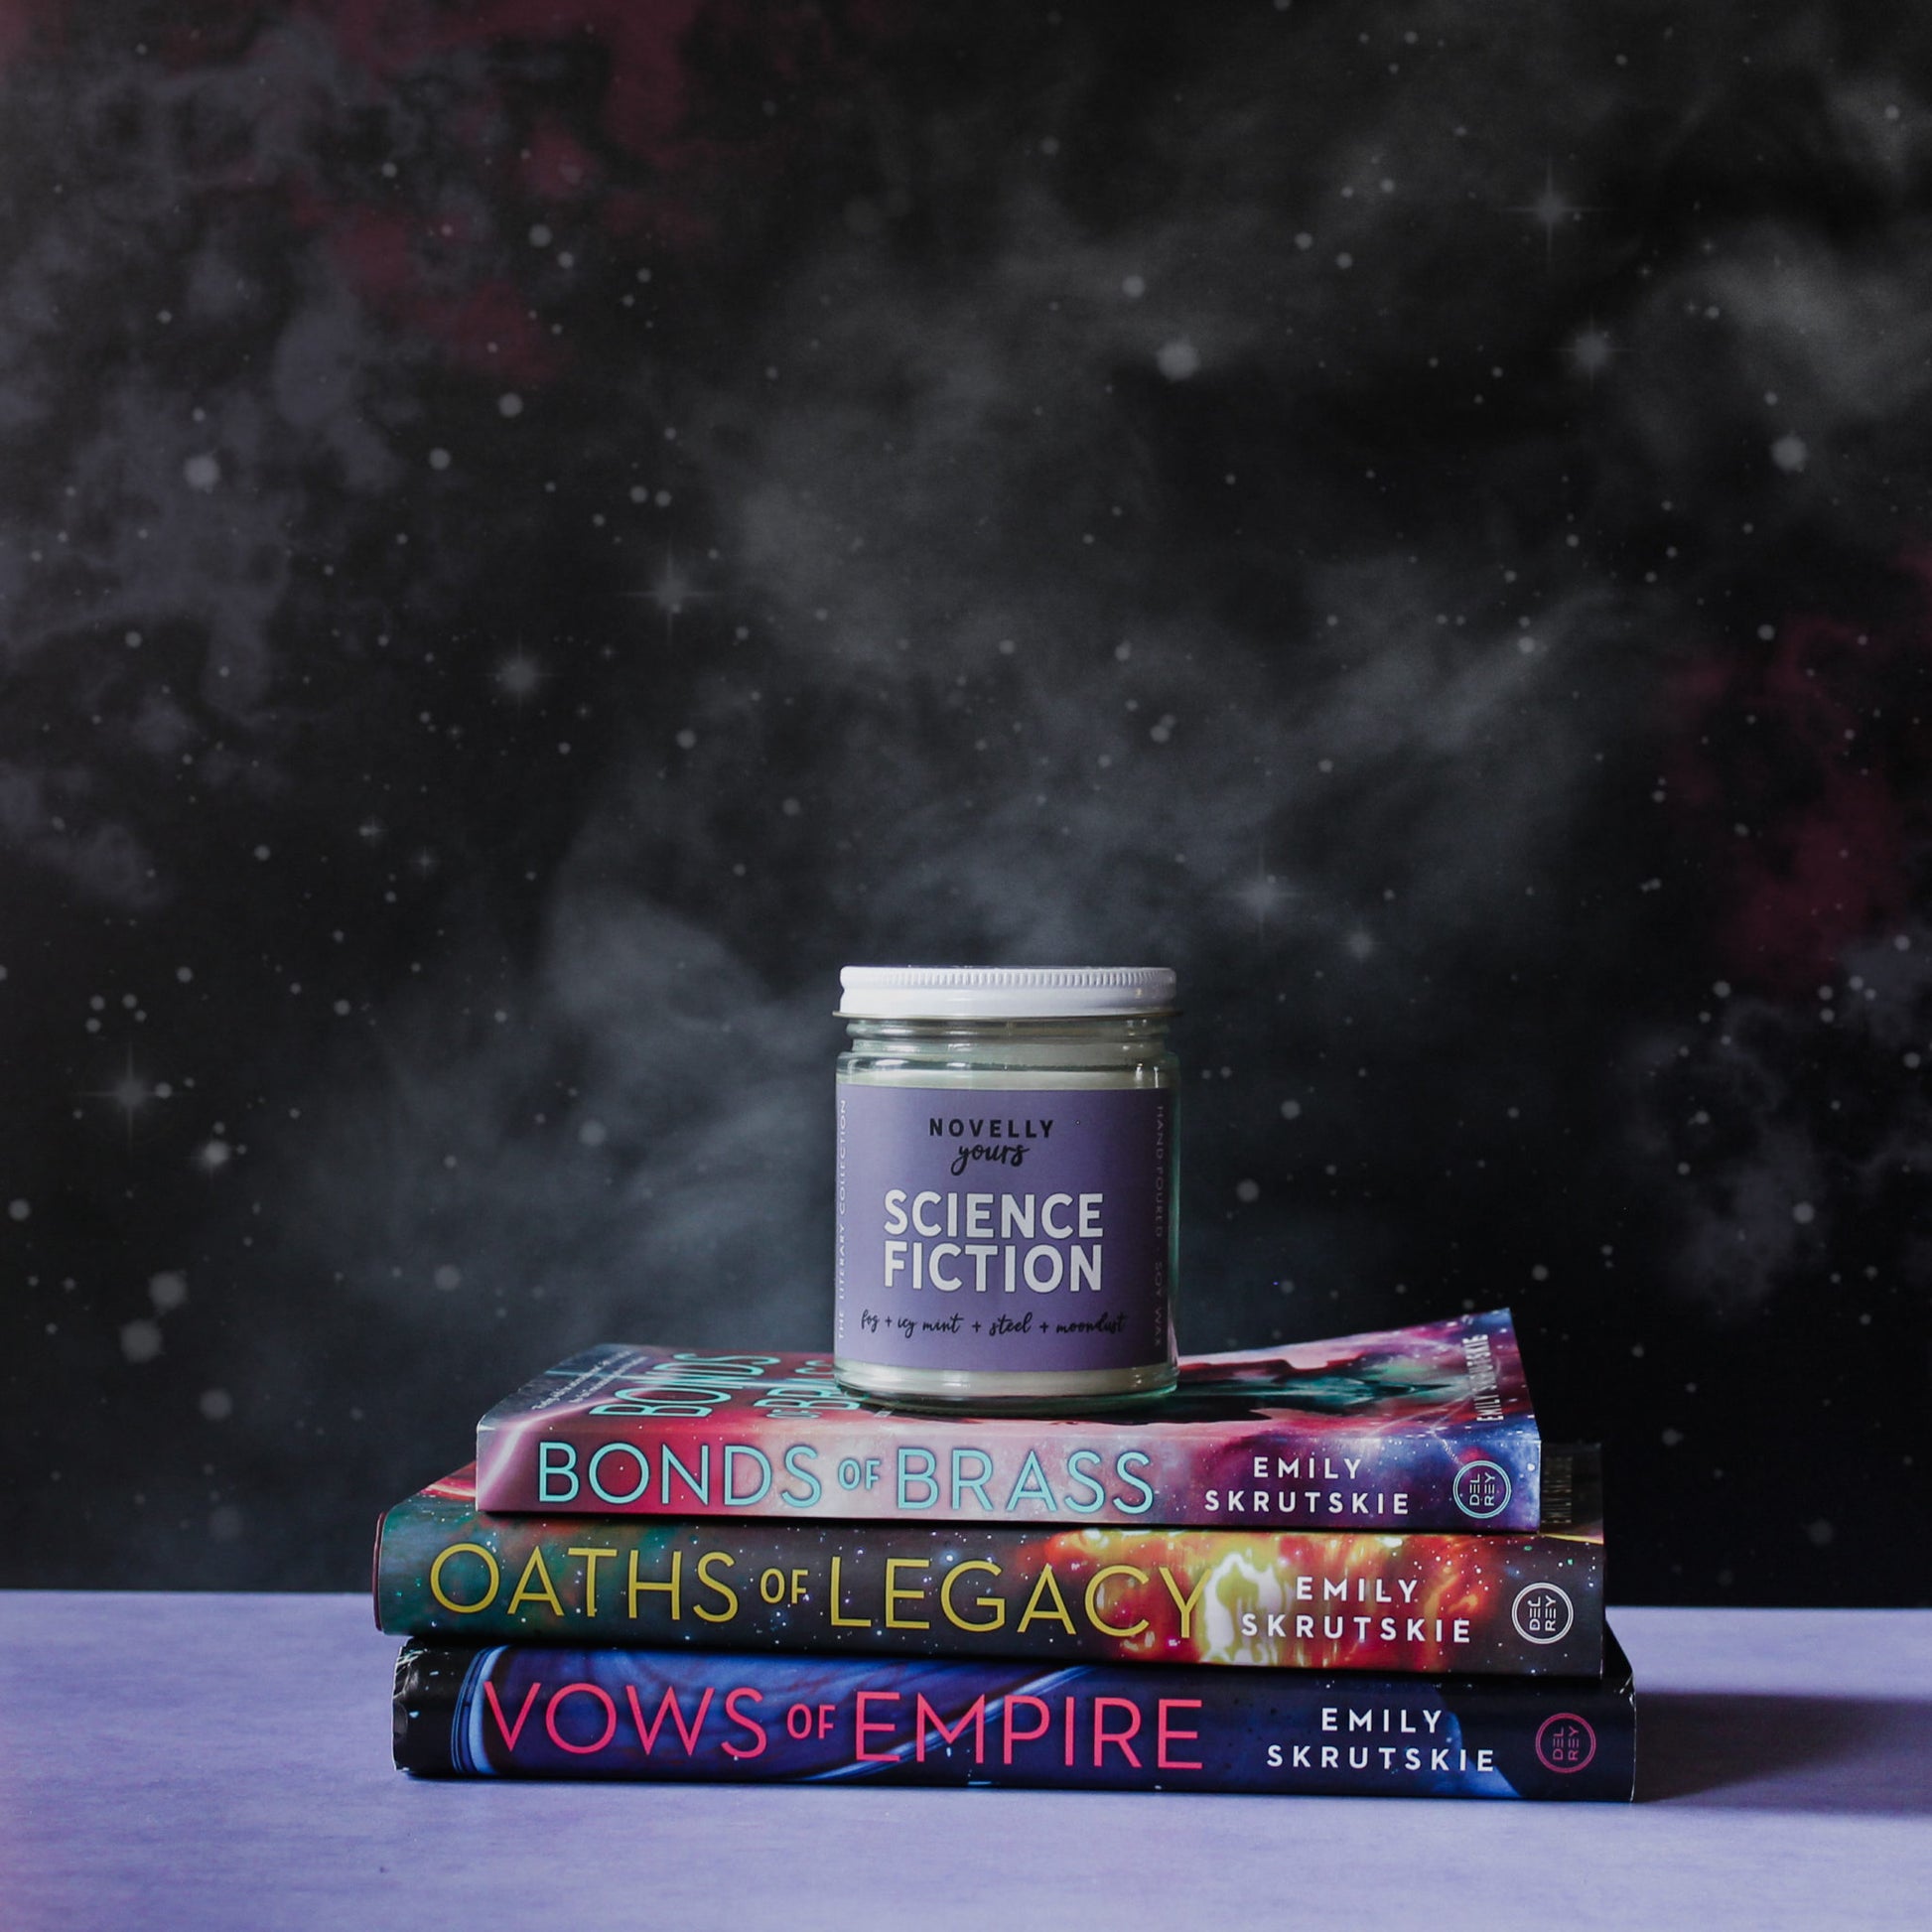 scented soy wax candle labeled "Science Fiction" sitting on top of a stack of sci-fi books. The background is black with stars on a purple base.